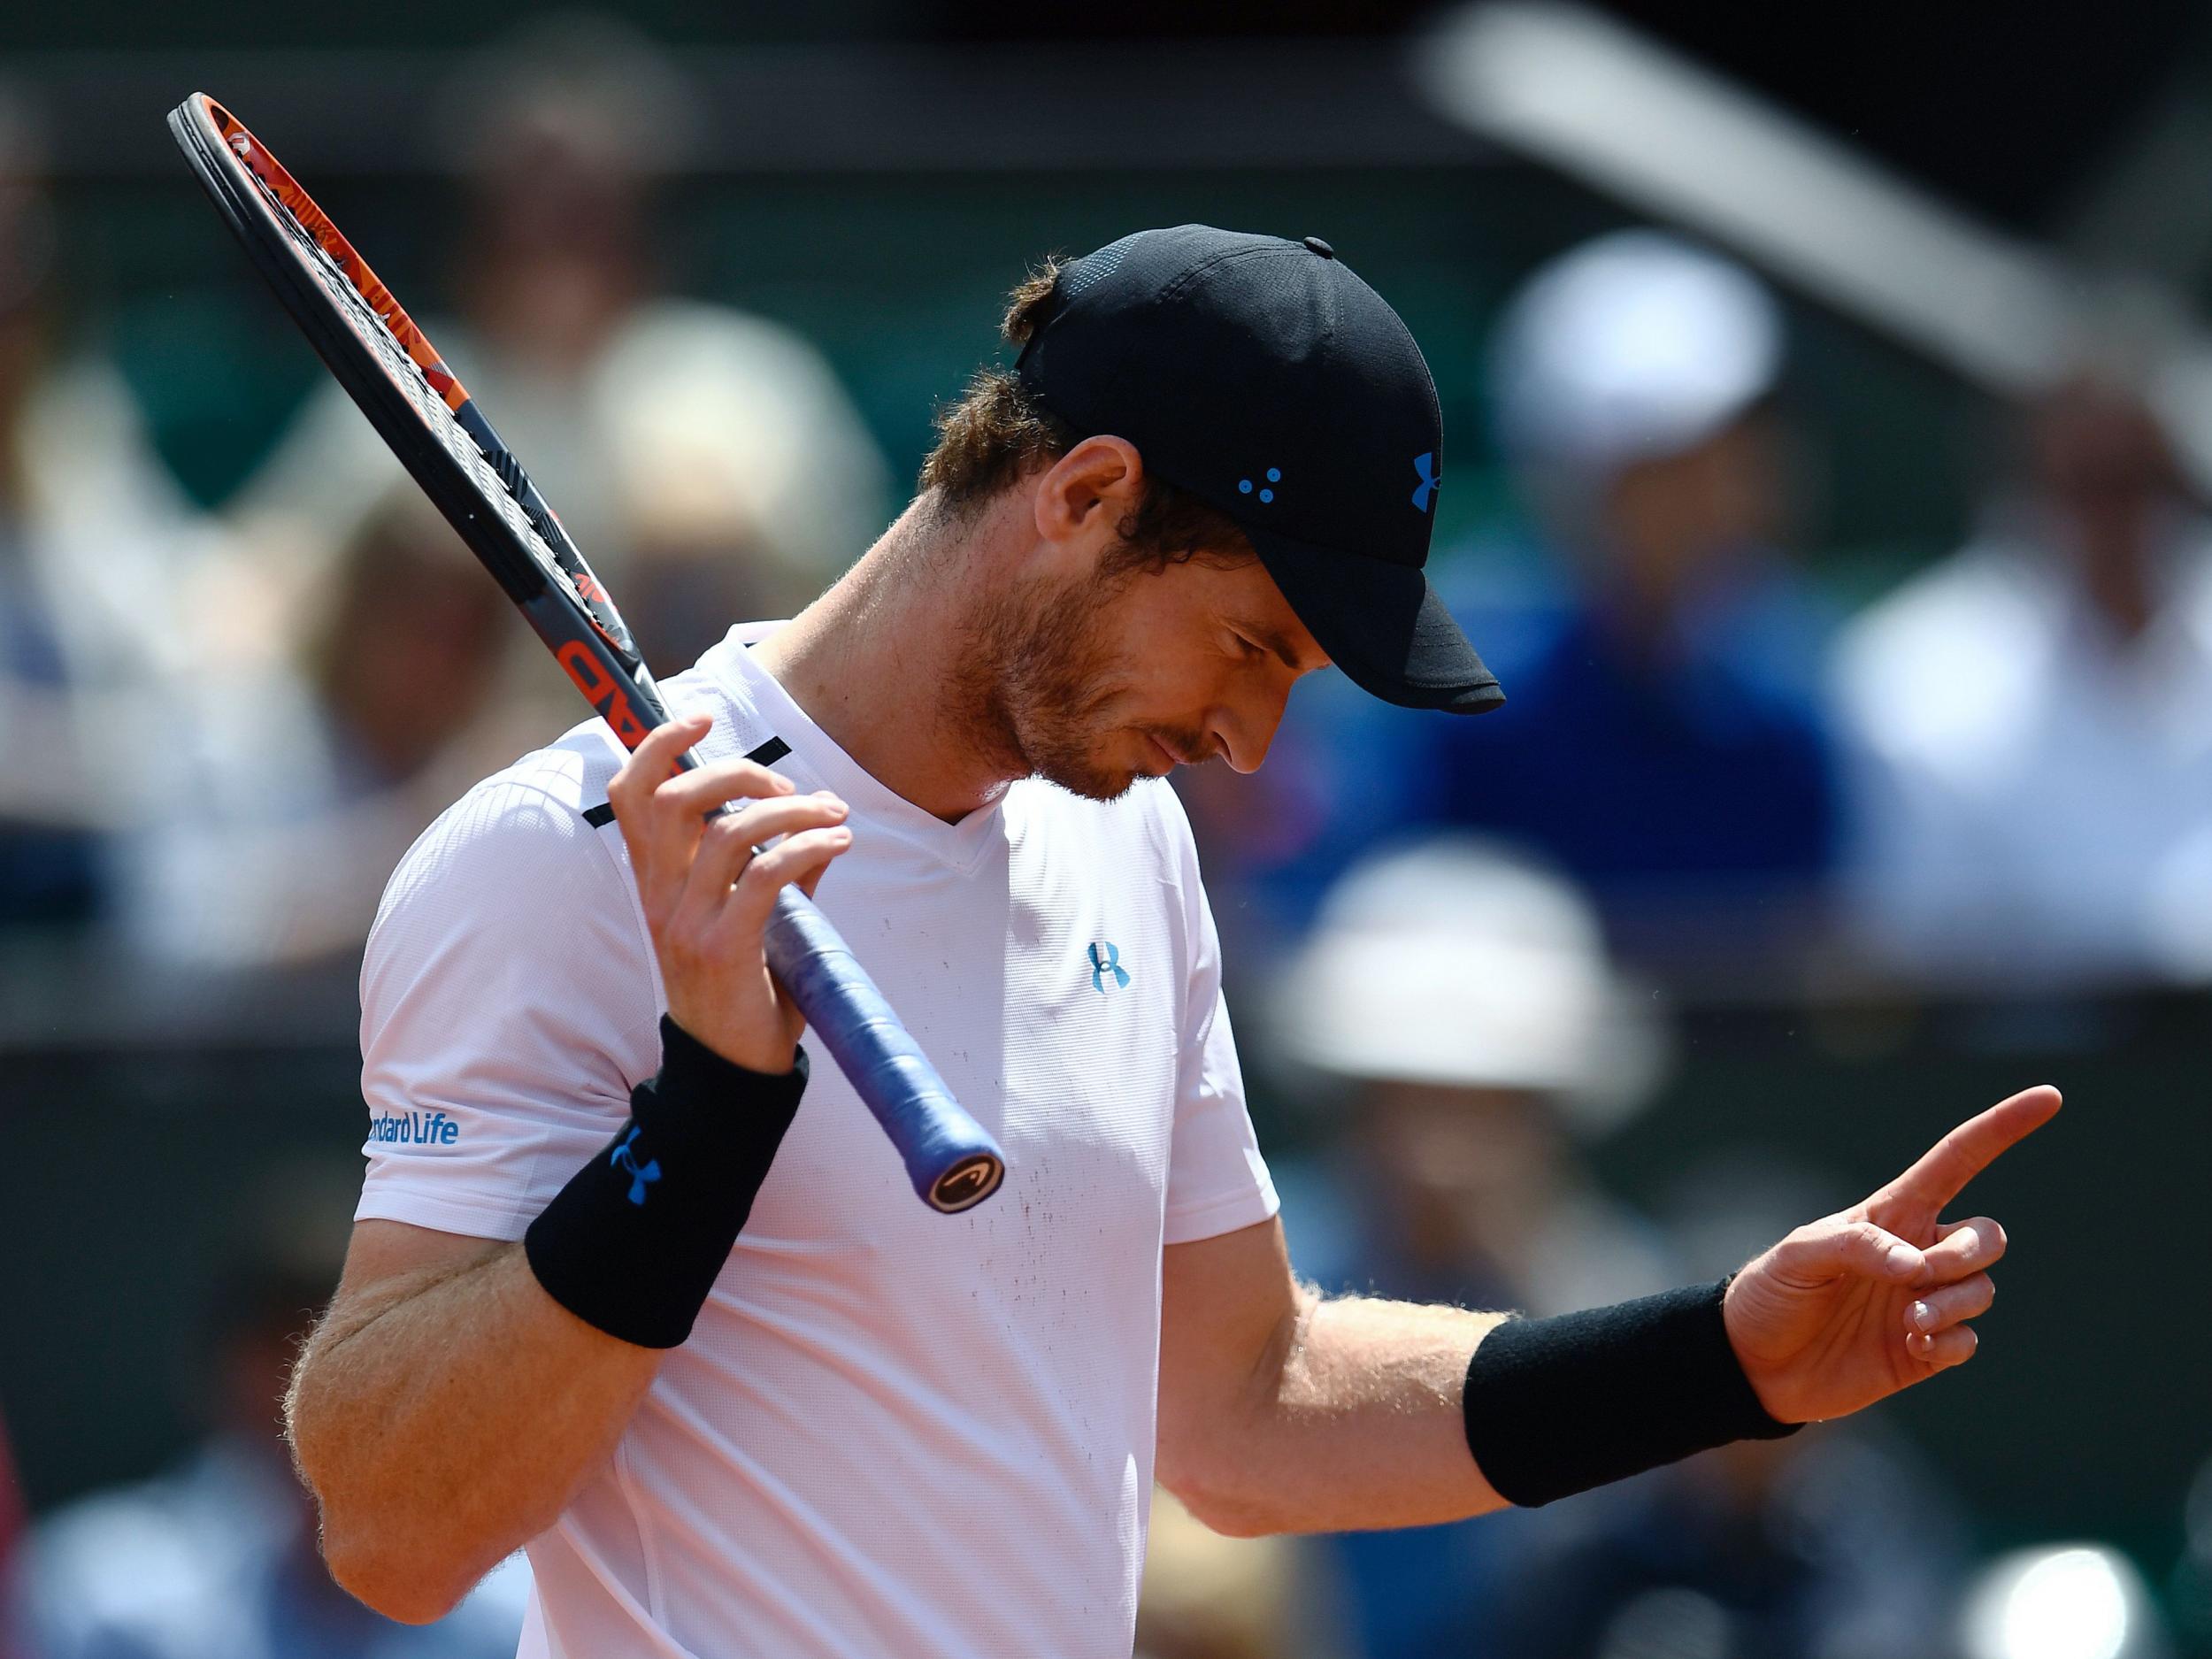 Murray will play Stan Wawrinka for a place in the French Open final